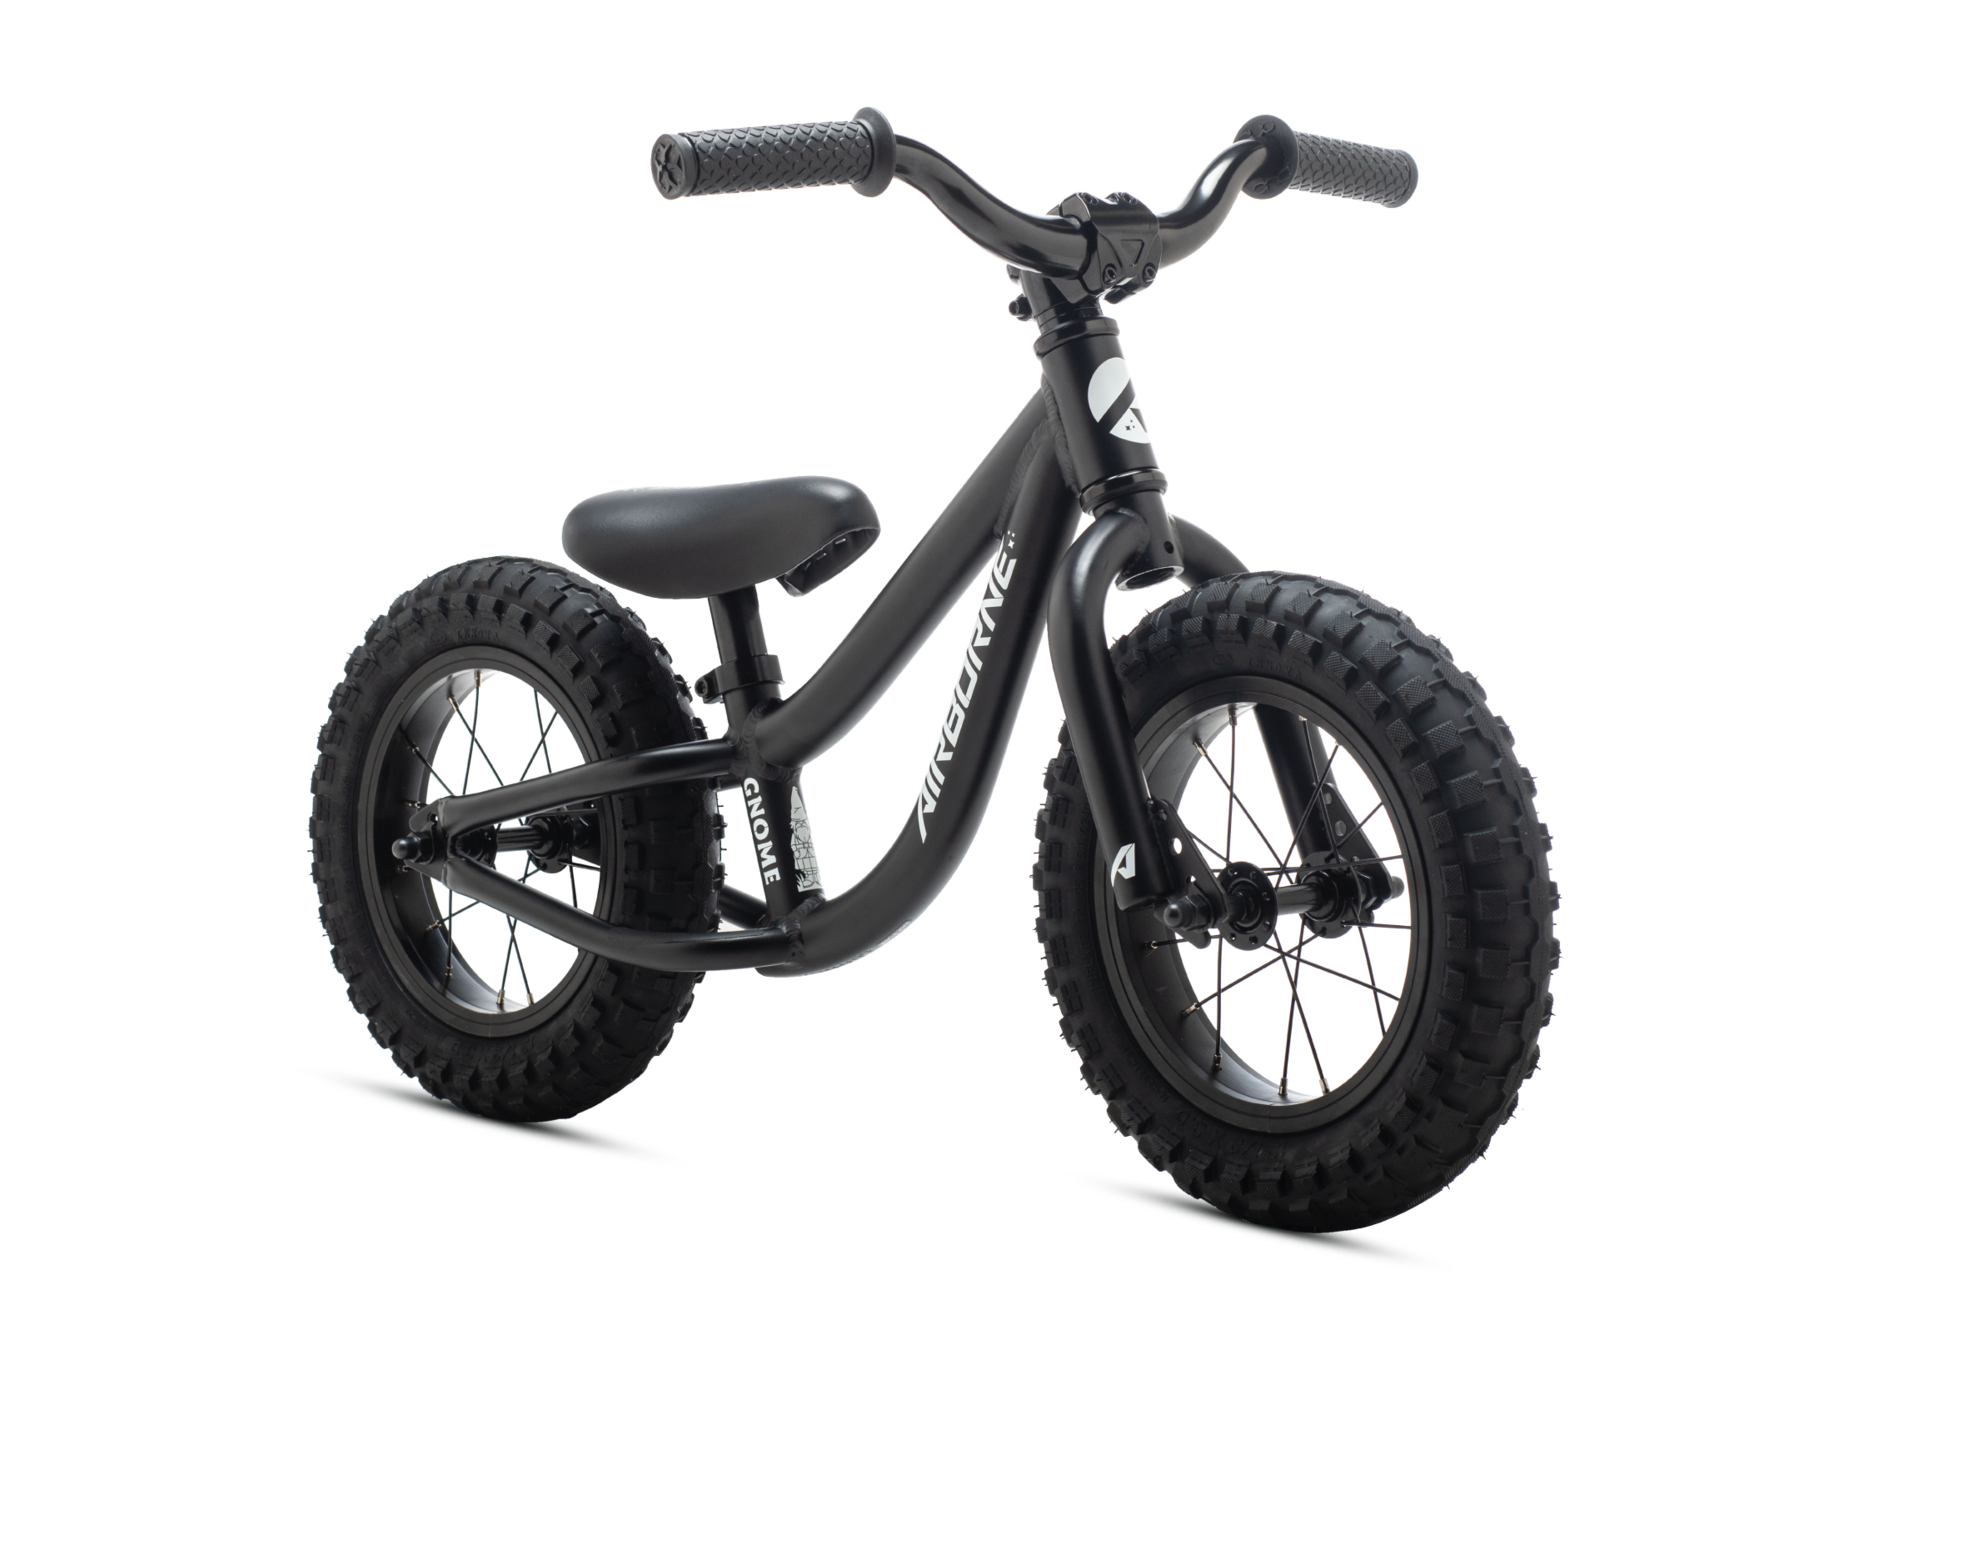 Airborne Gnome balance bike may be small, but 3″ wide plus tires offer big grip